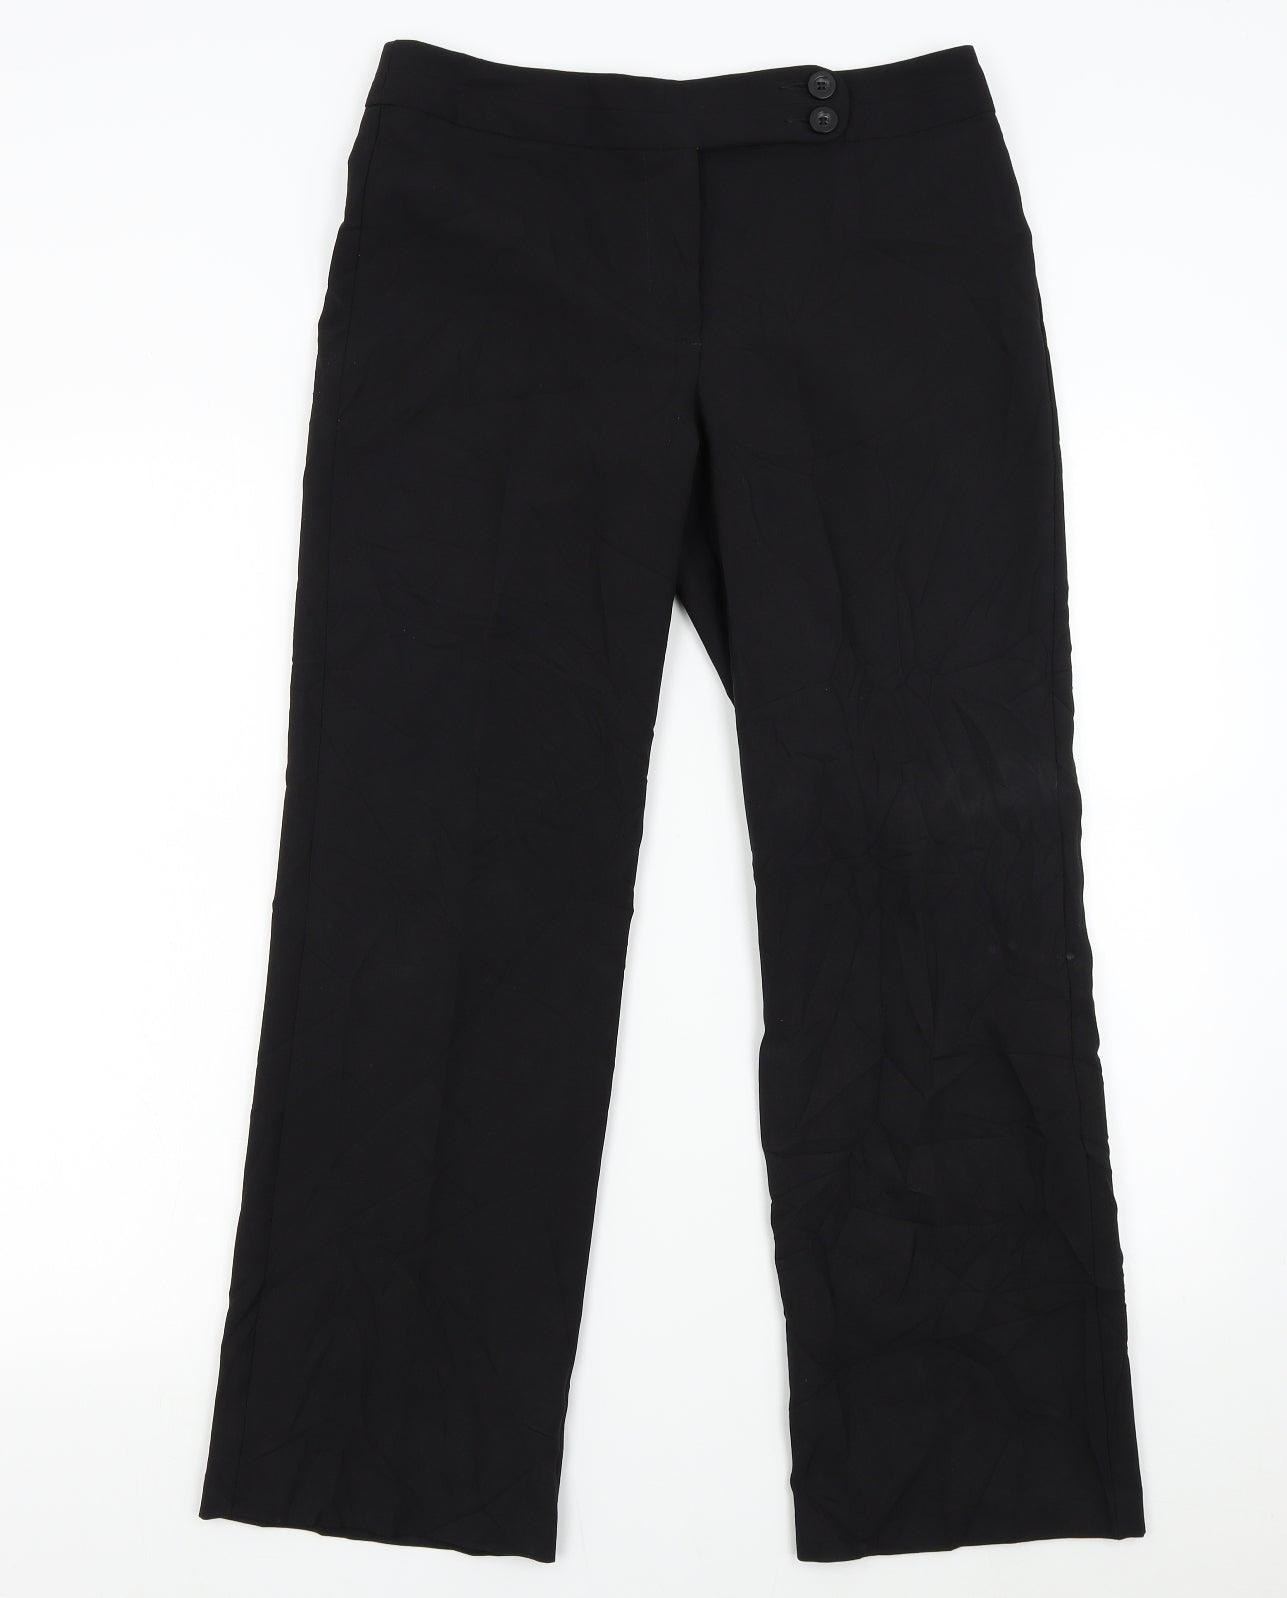 George Women's Black pants/ trousers with stretch size 14 wide leg  pre-owned | eBay